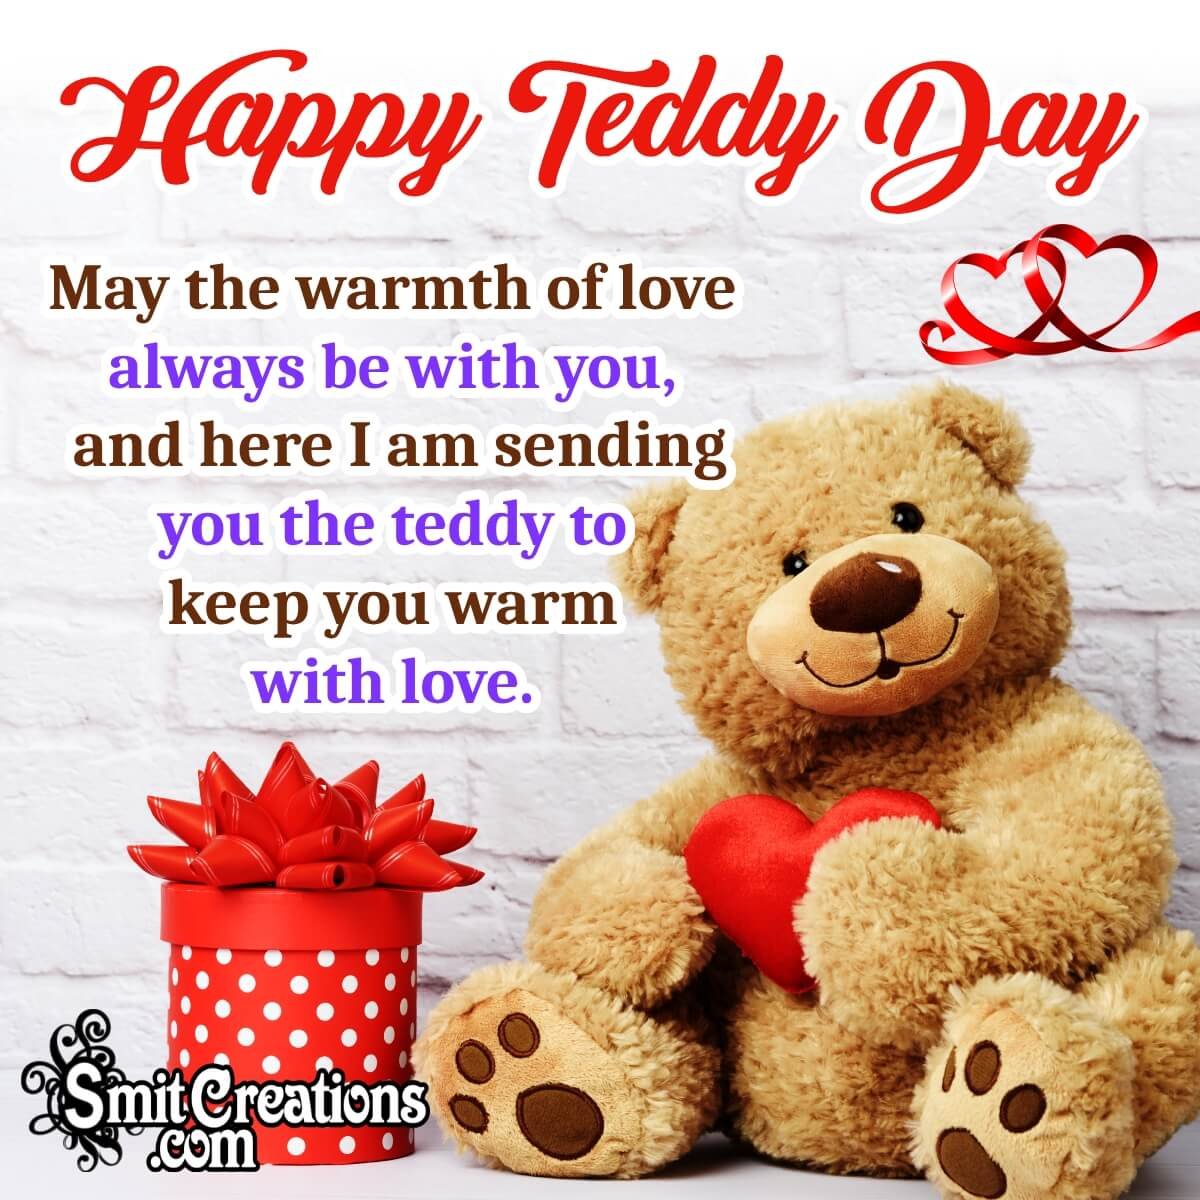 65 Happy Teddy Bear Day Wishes - Smit Creations – Your Daily Dose of Fun.